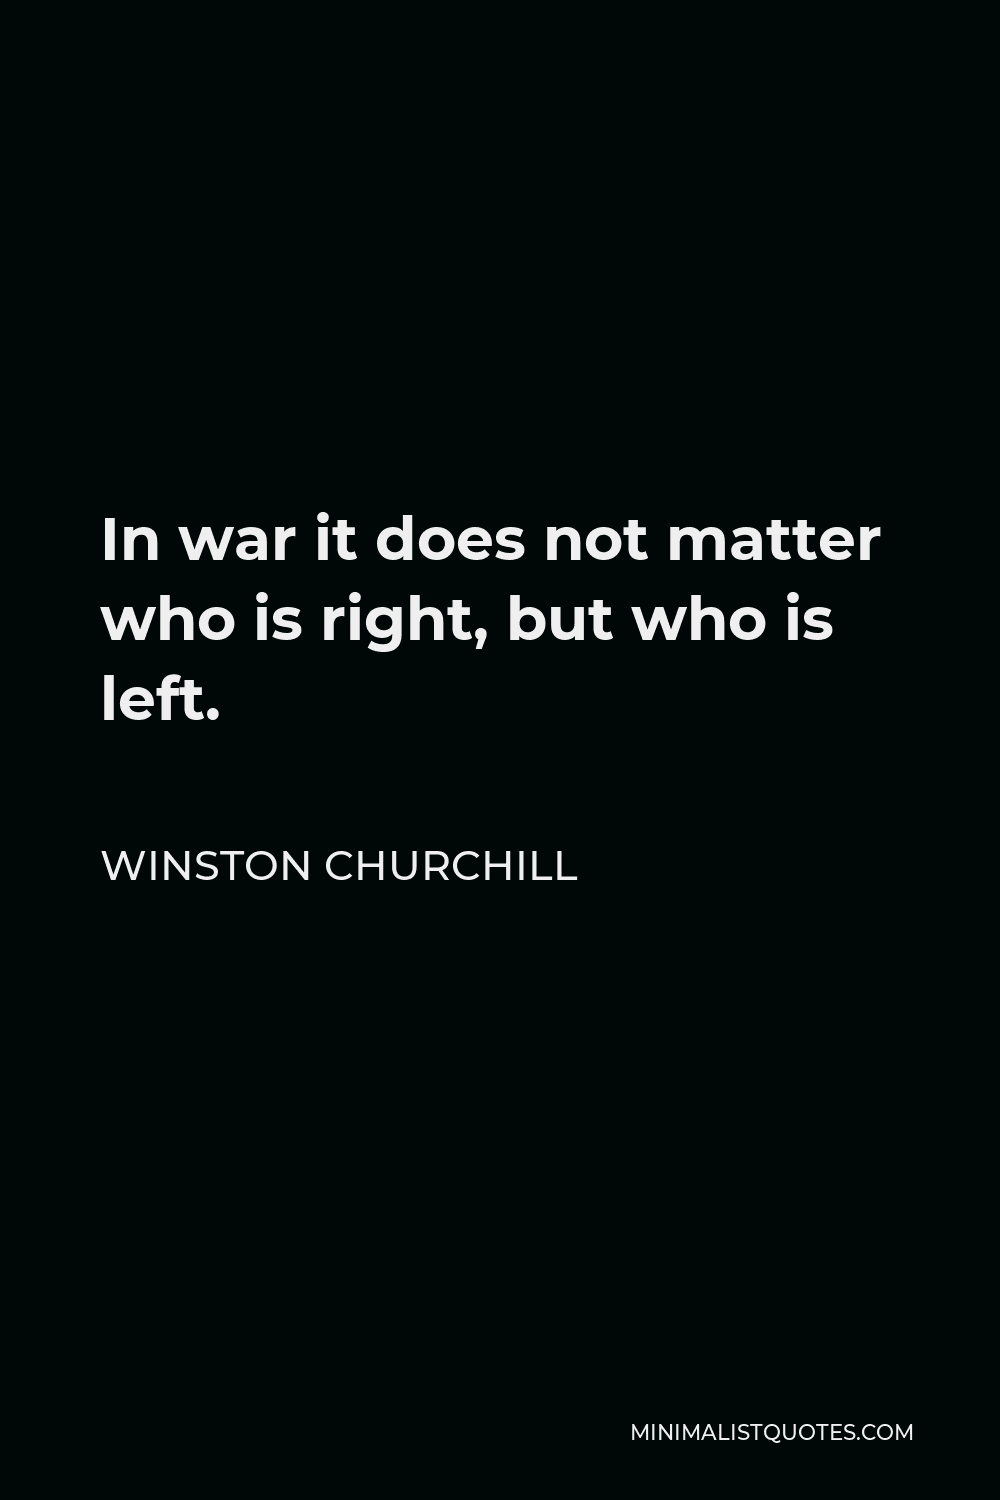 Winston Churchill Quote - In war it does not matter who is right, but who is left.